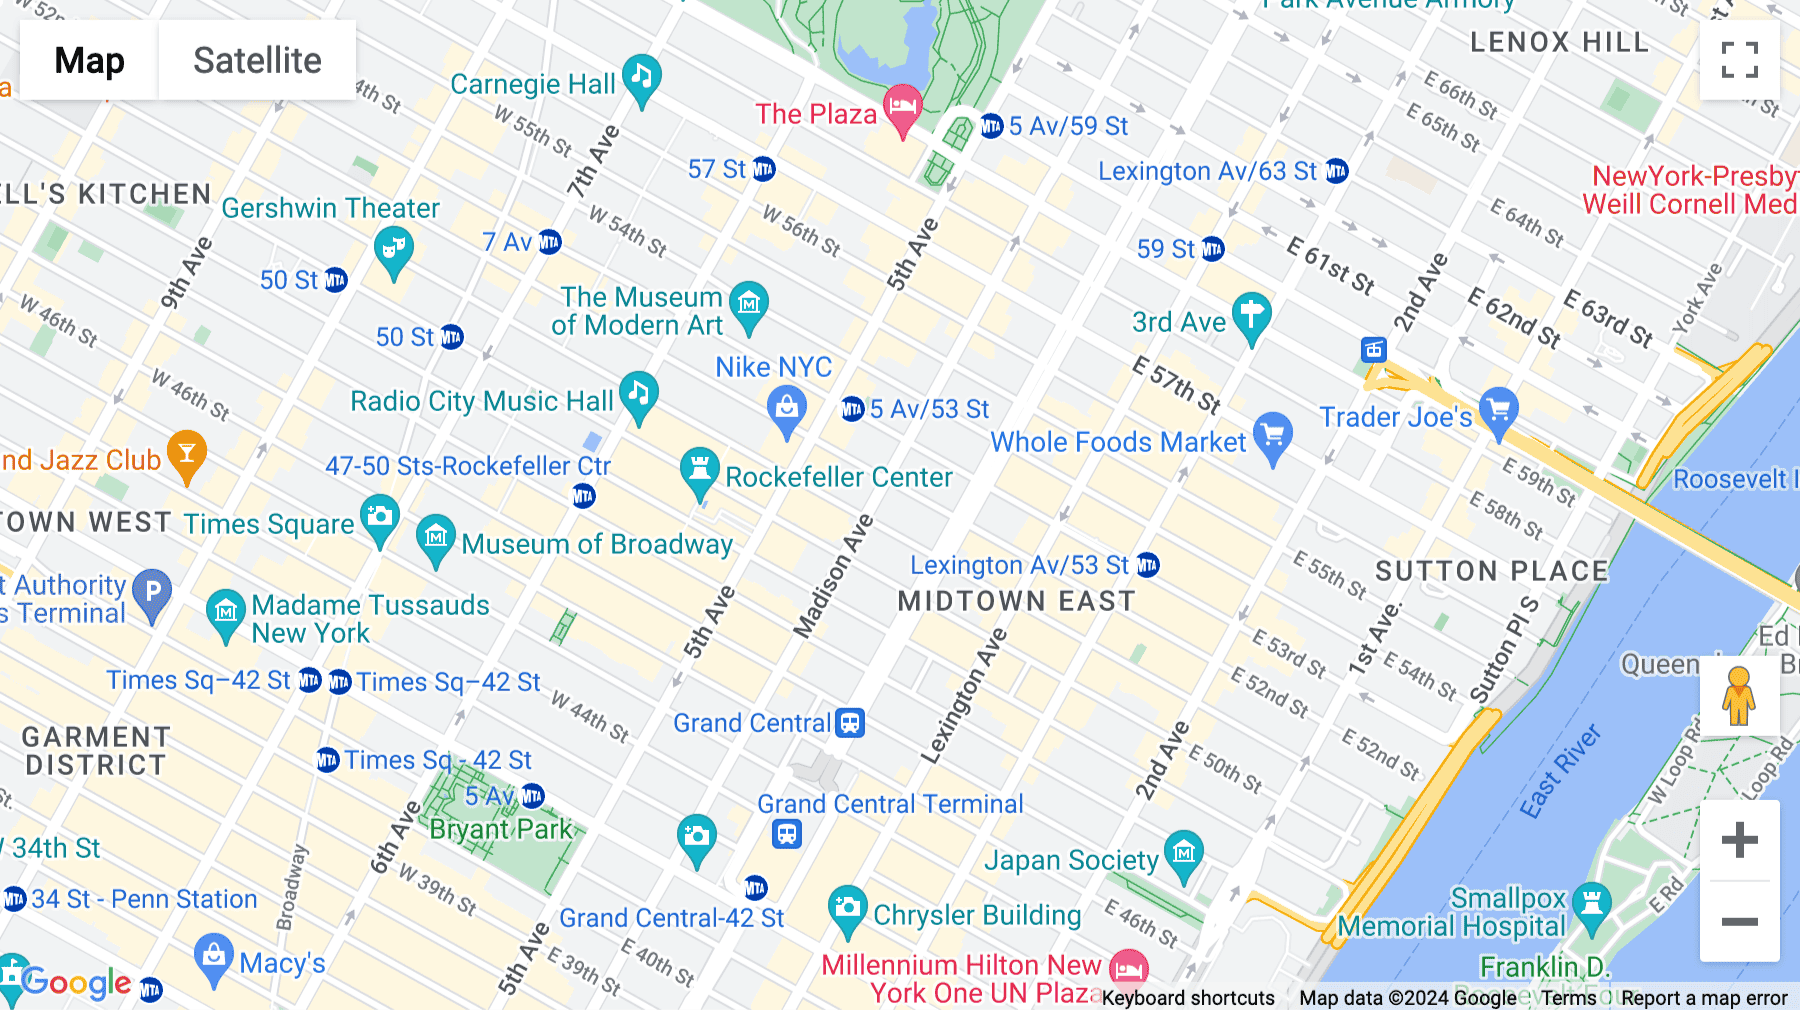 Click for interative map of 485 Madison Avenue, New York, New York